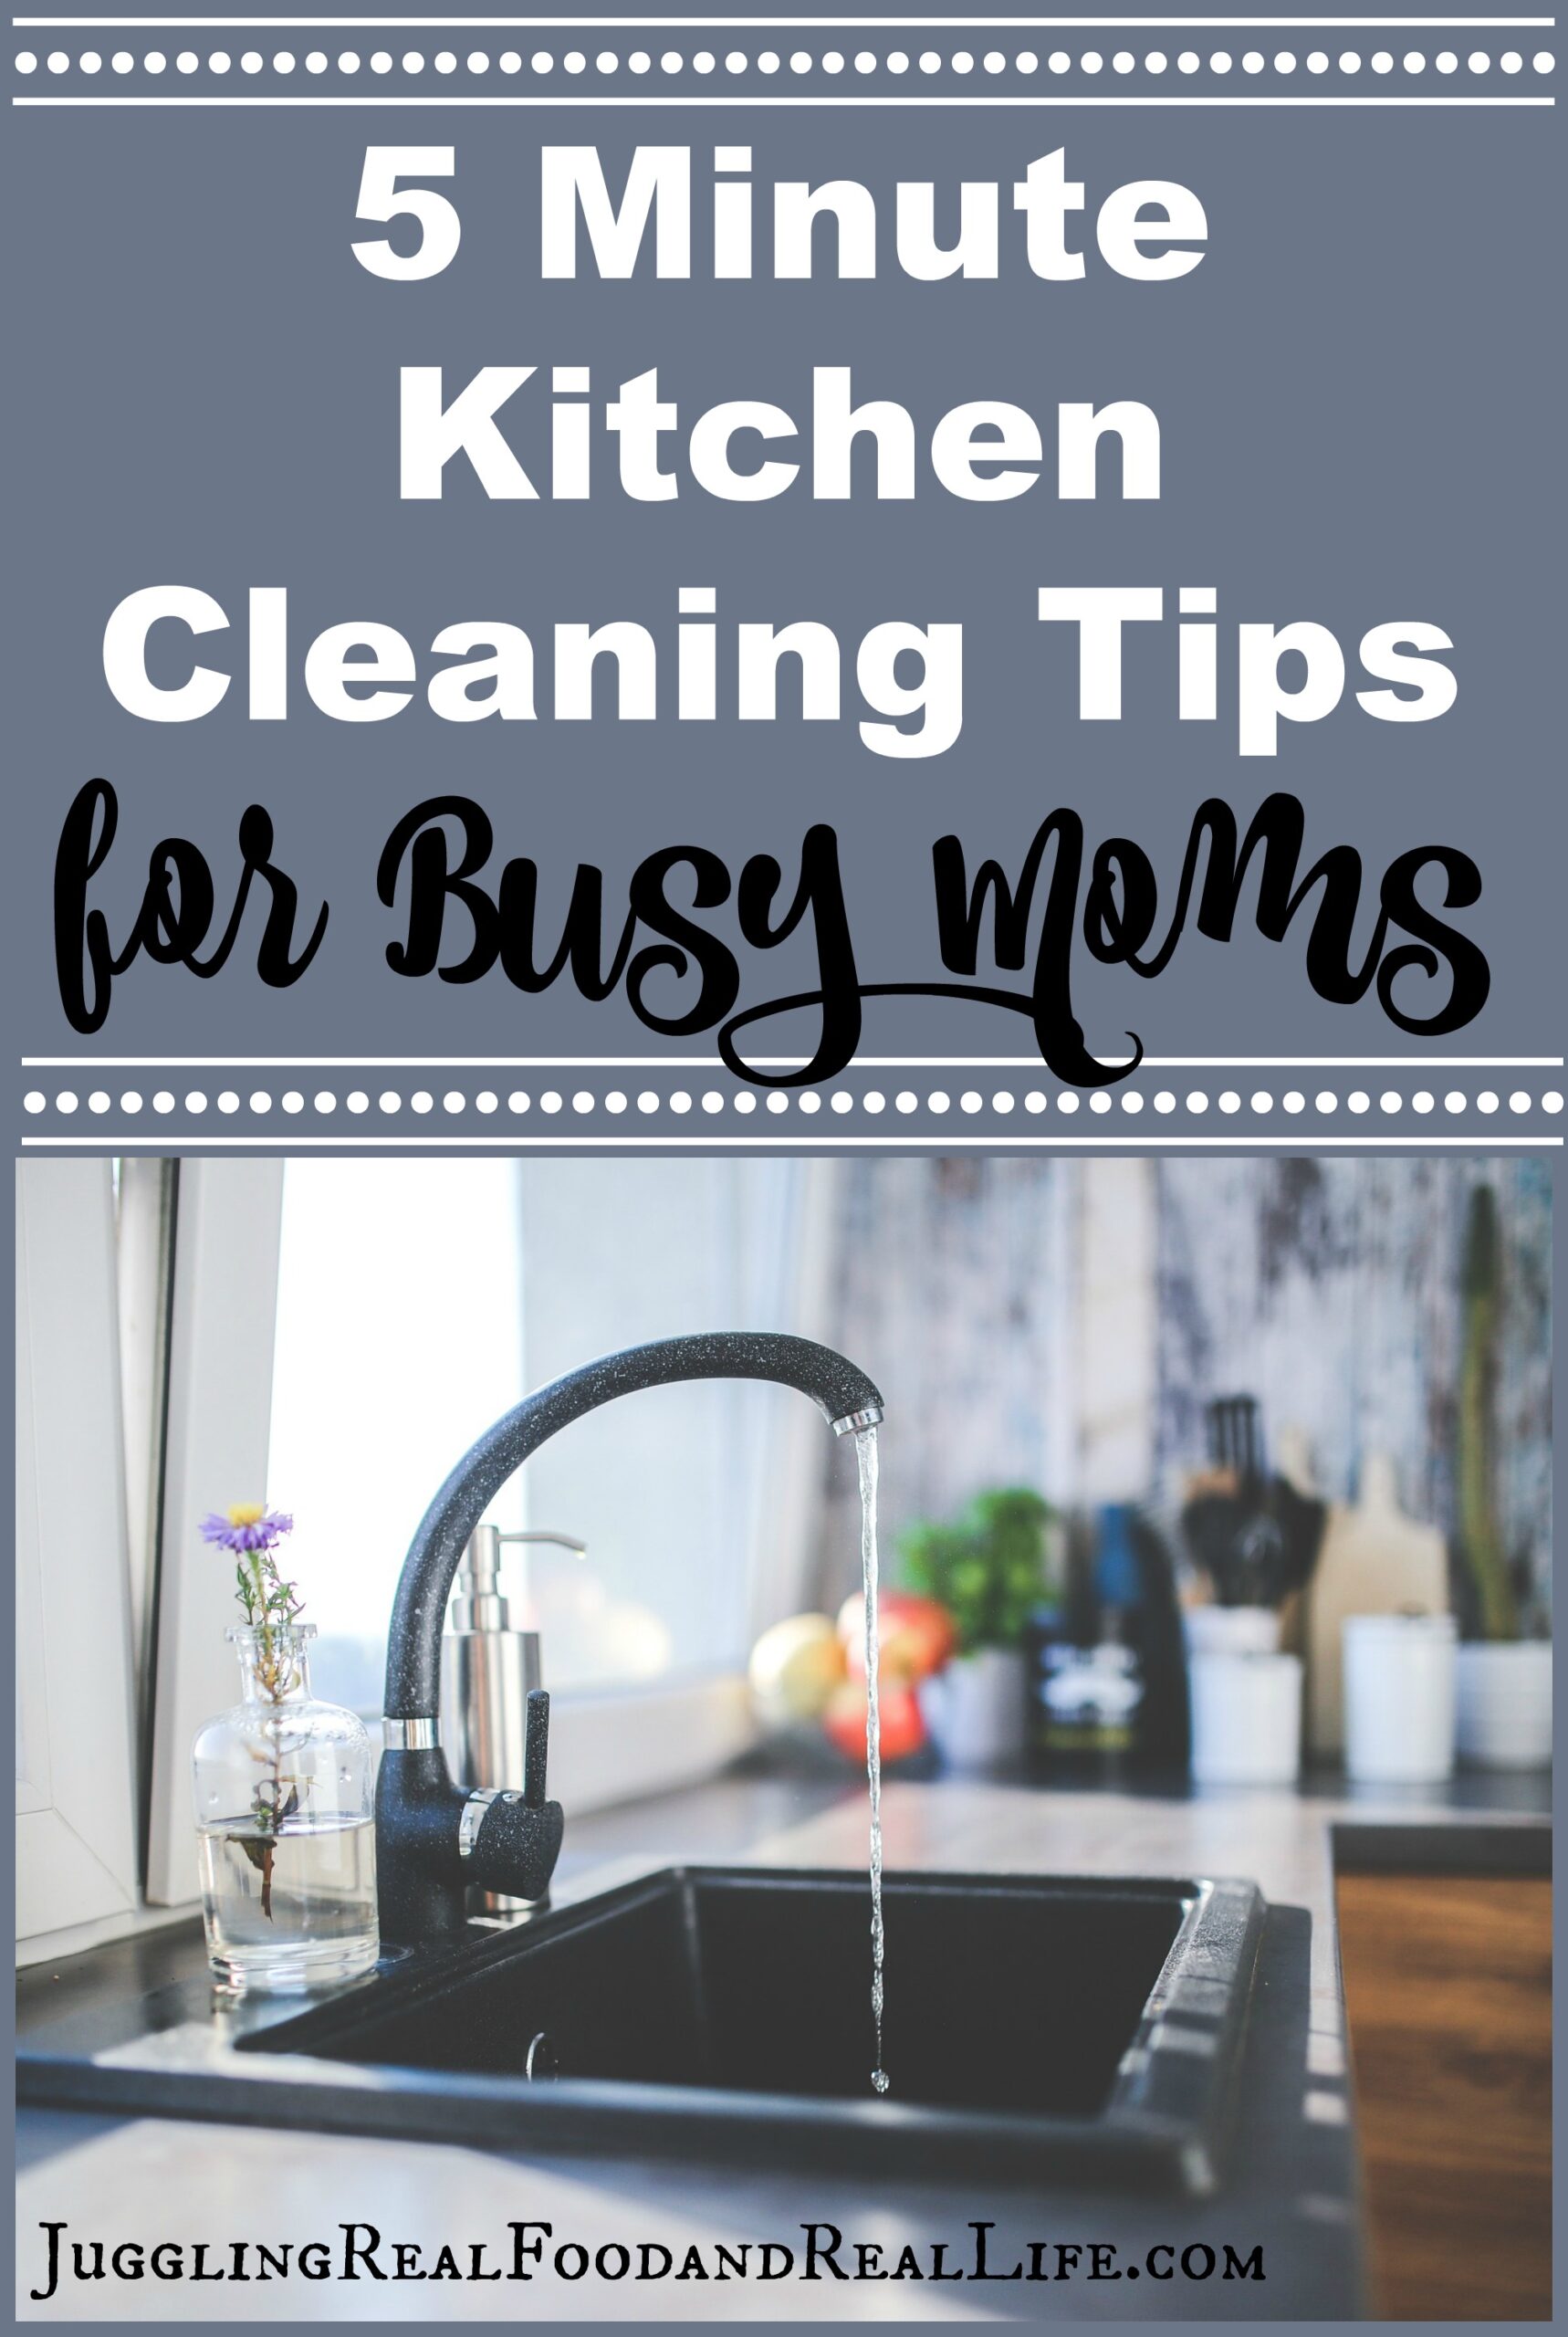 5 Minute Kitchen Cleaning Tips for Busy Moms